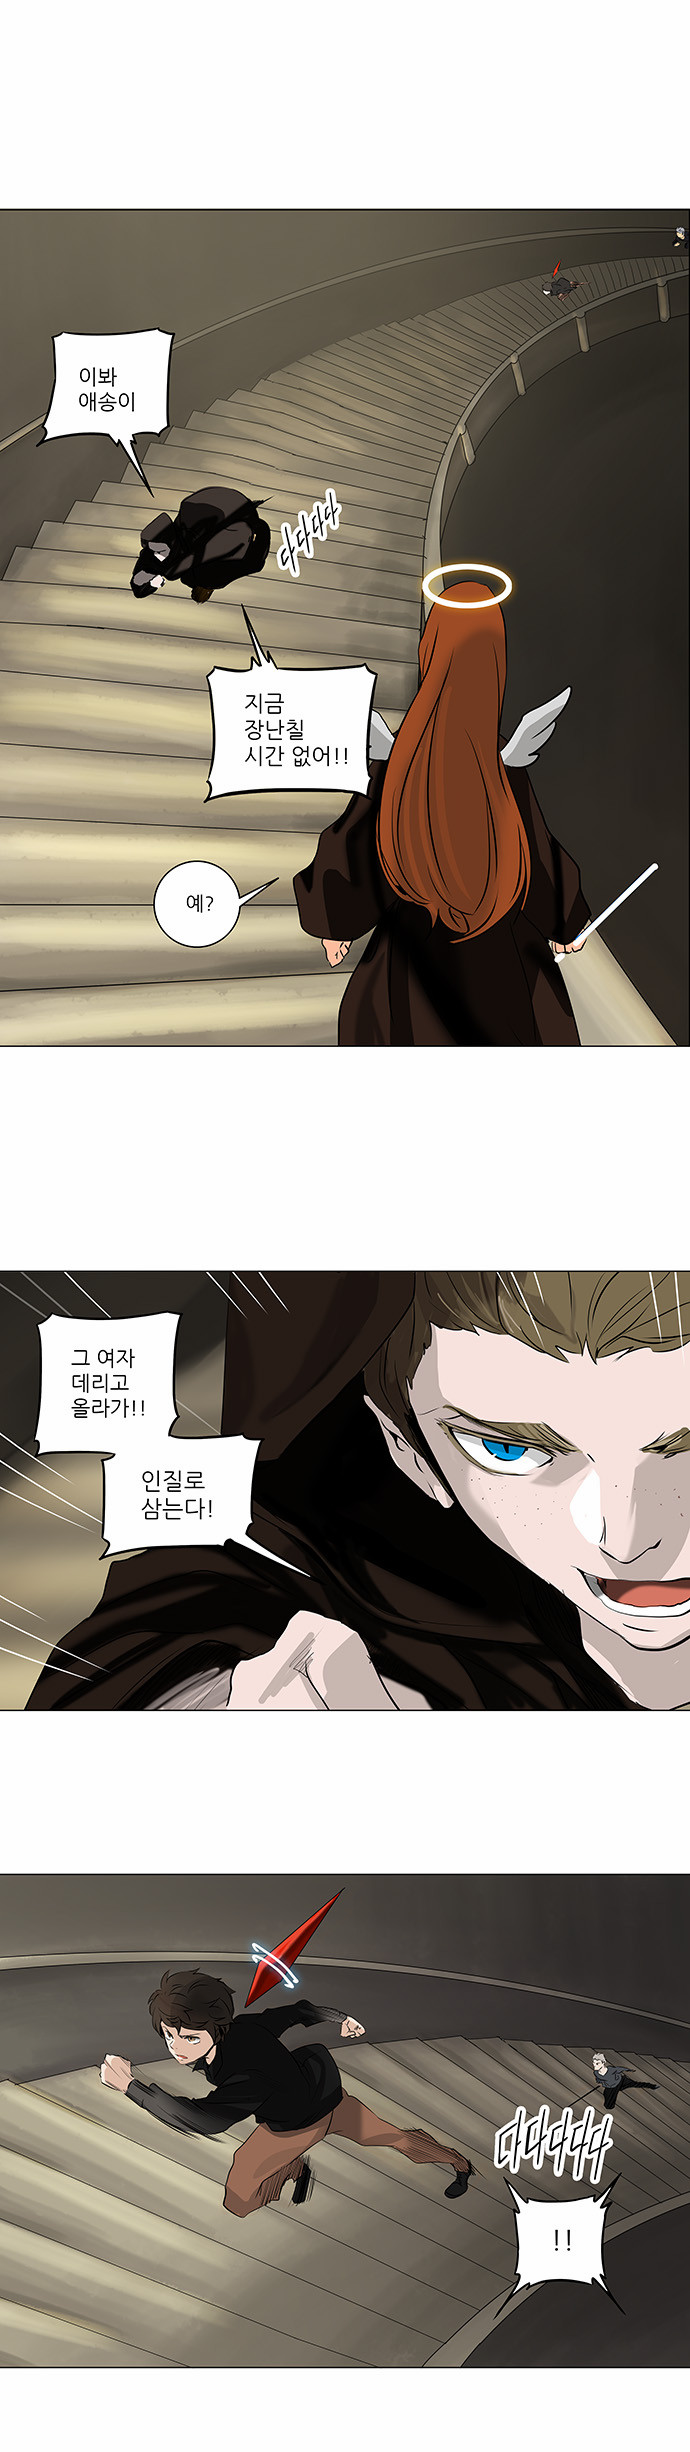 Tower of God - Chapter 224 - Page 1